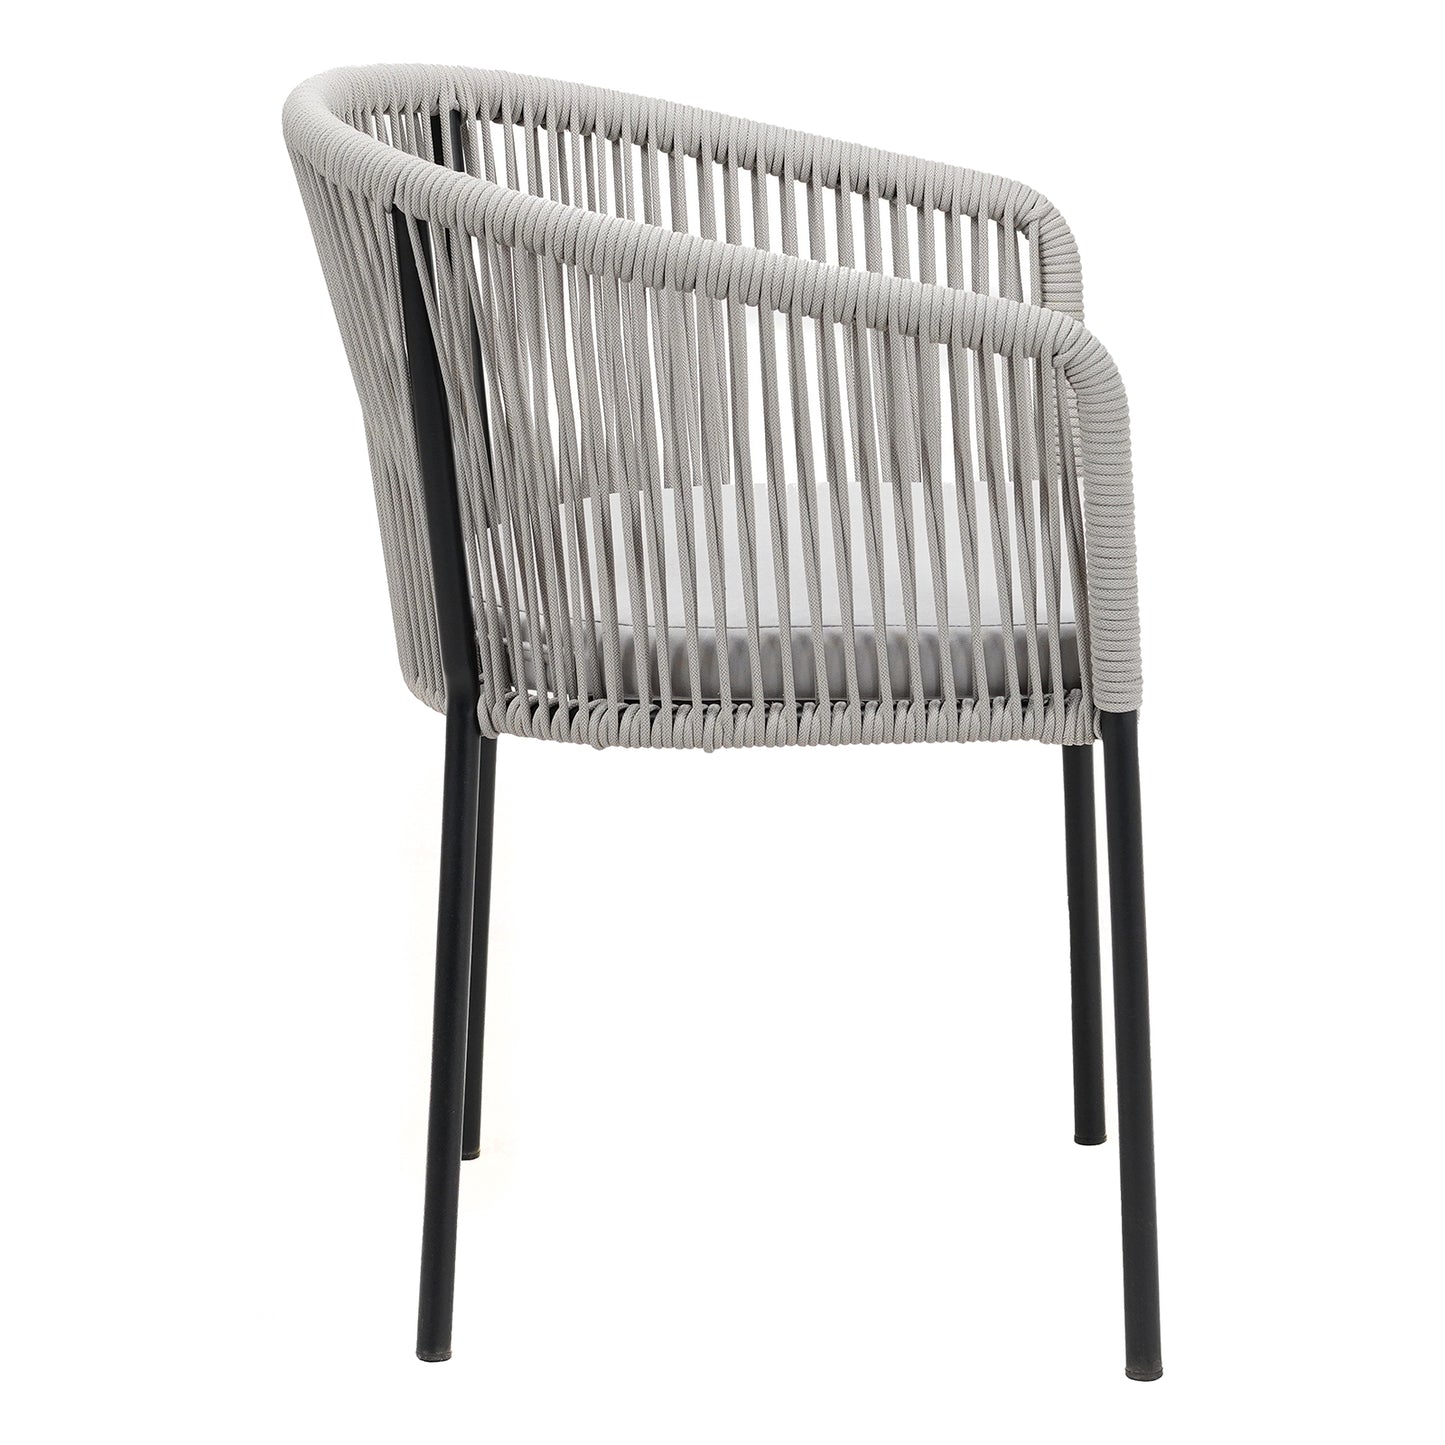 Daintree | Woven Robe Pebble Grey Metal Outdoor Dining Chairs | Set Of 2 | Pebble Grey